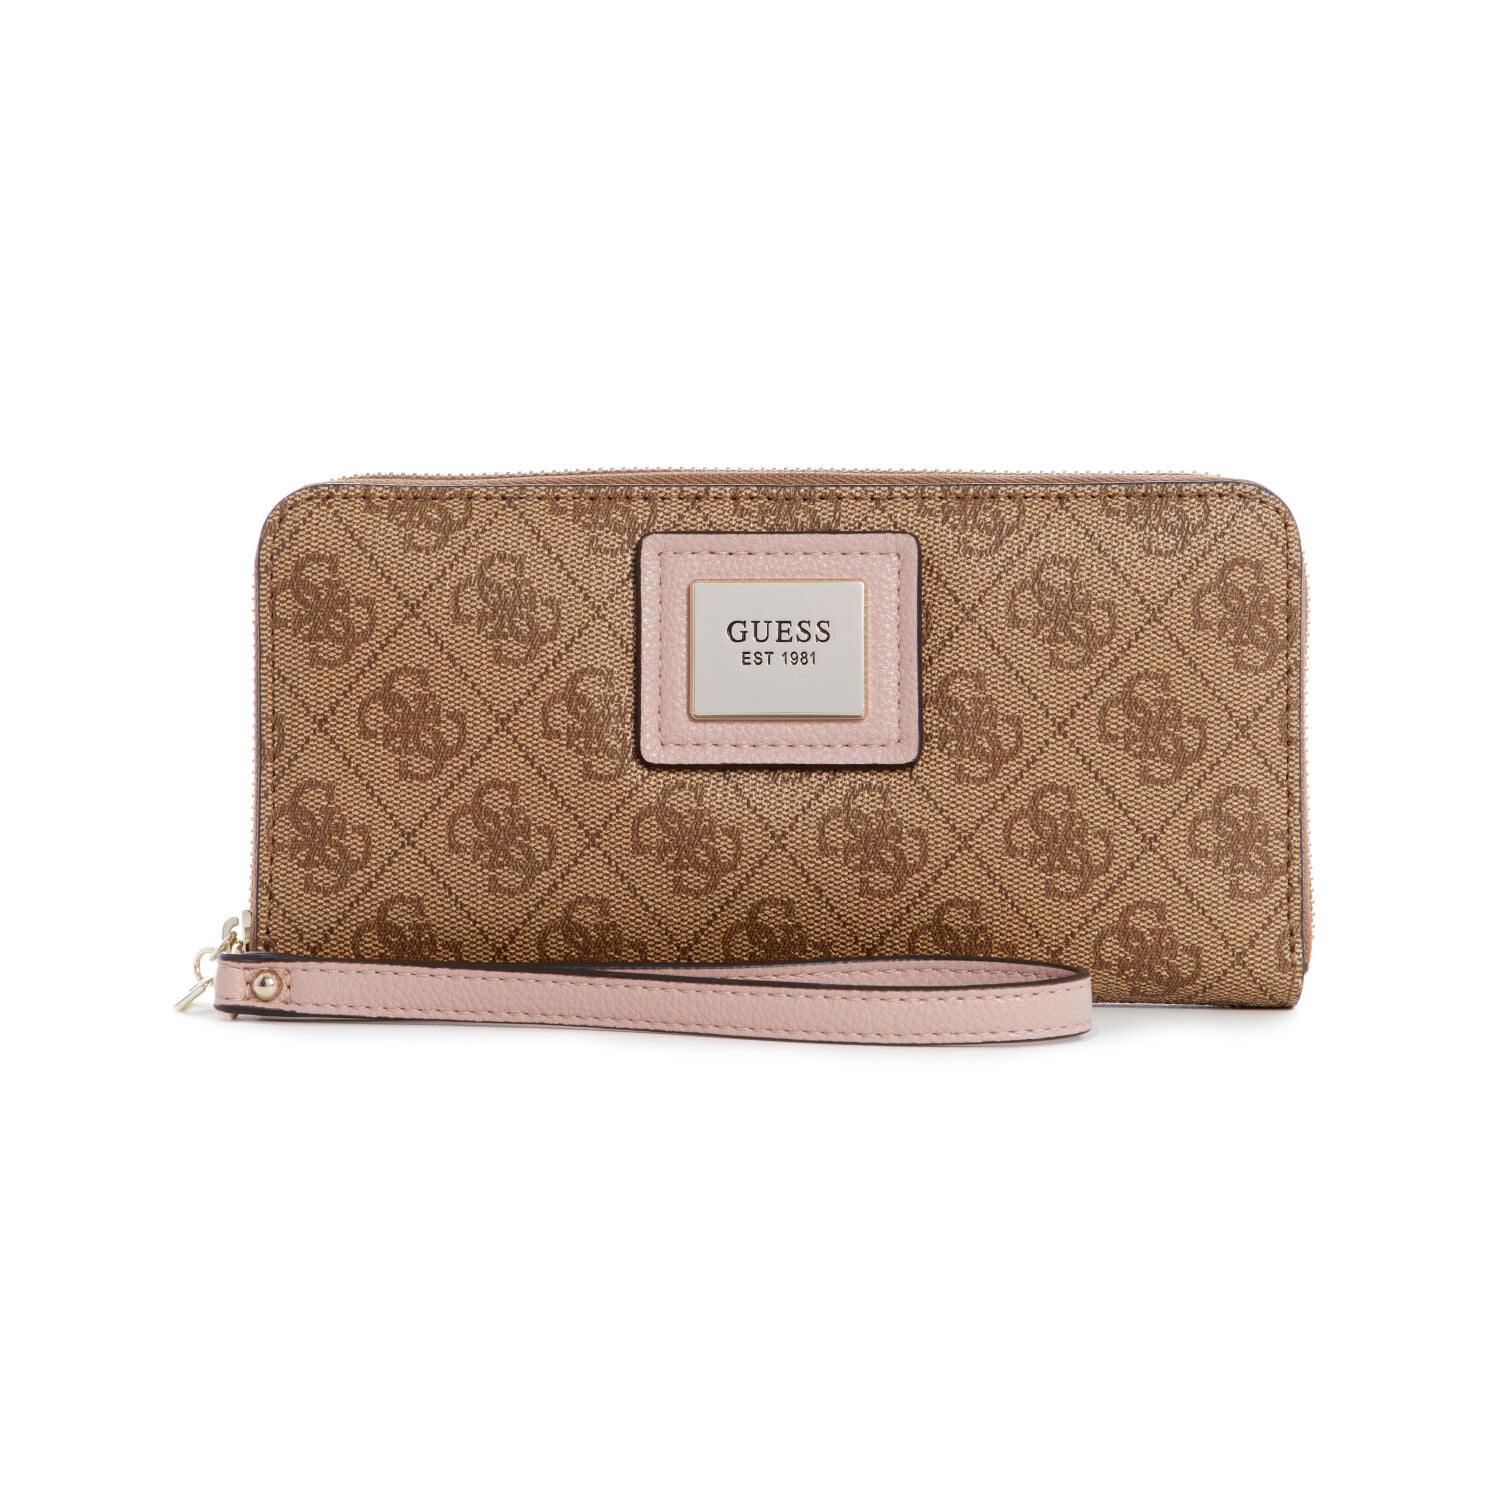 Guess Women's Candace Large Zip Around Wallet - Brown Multi 